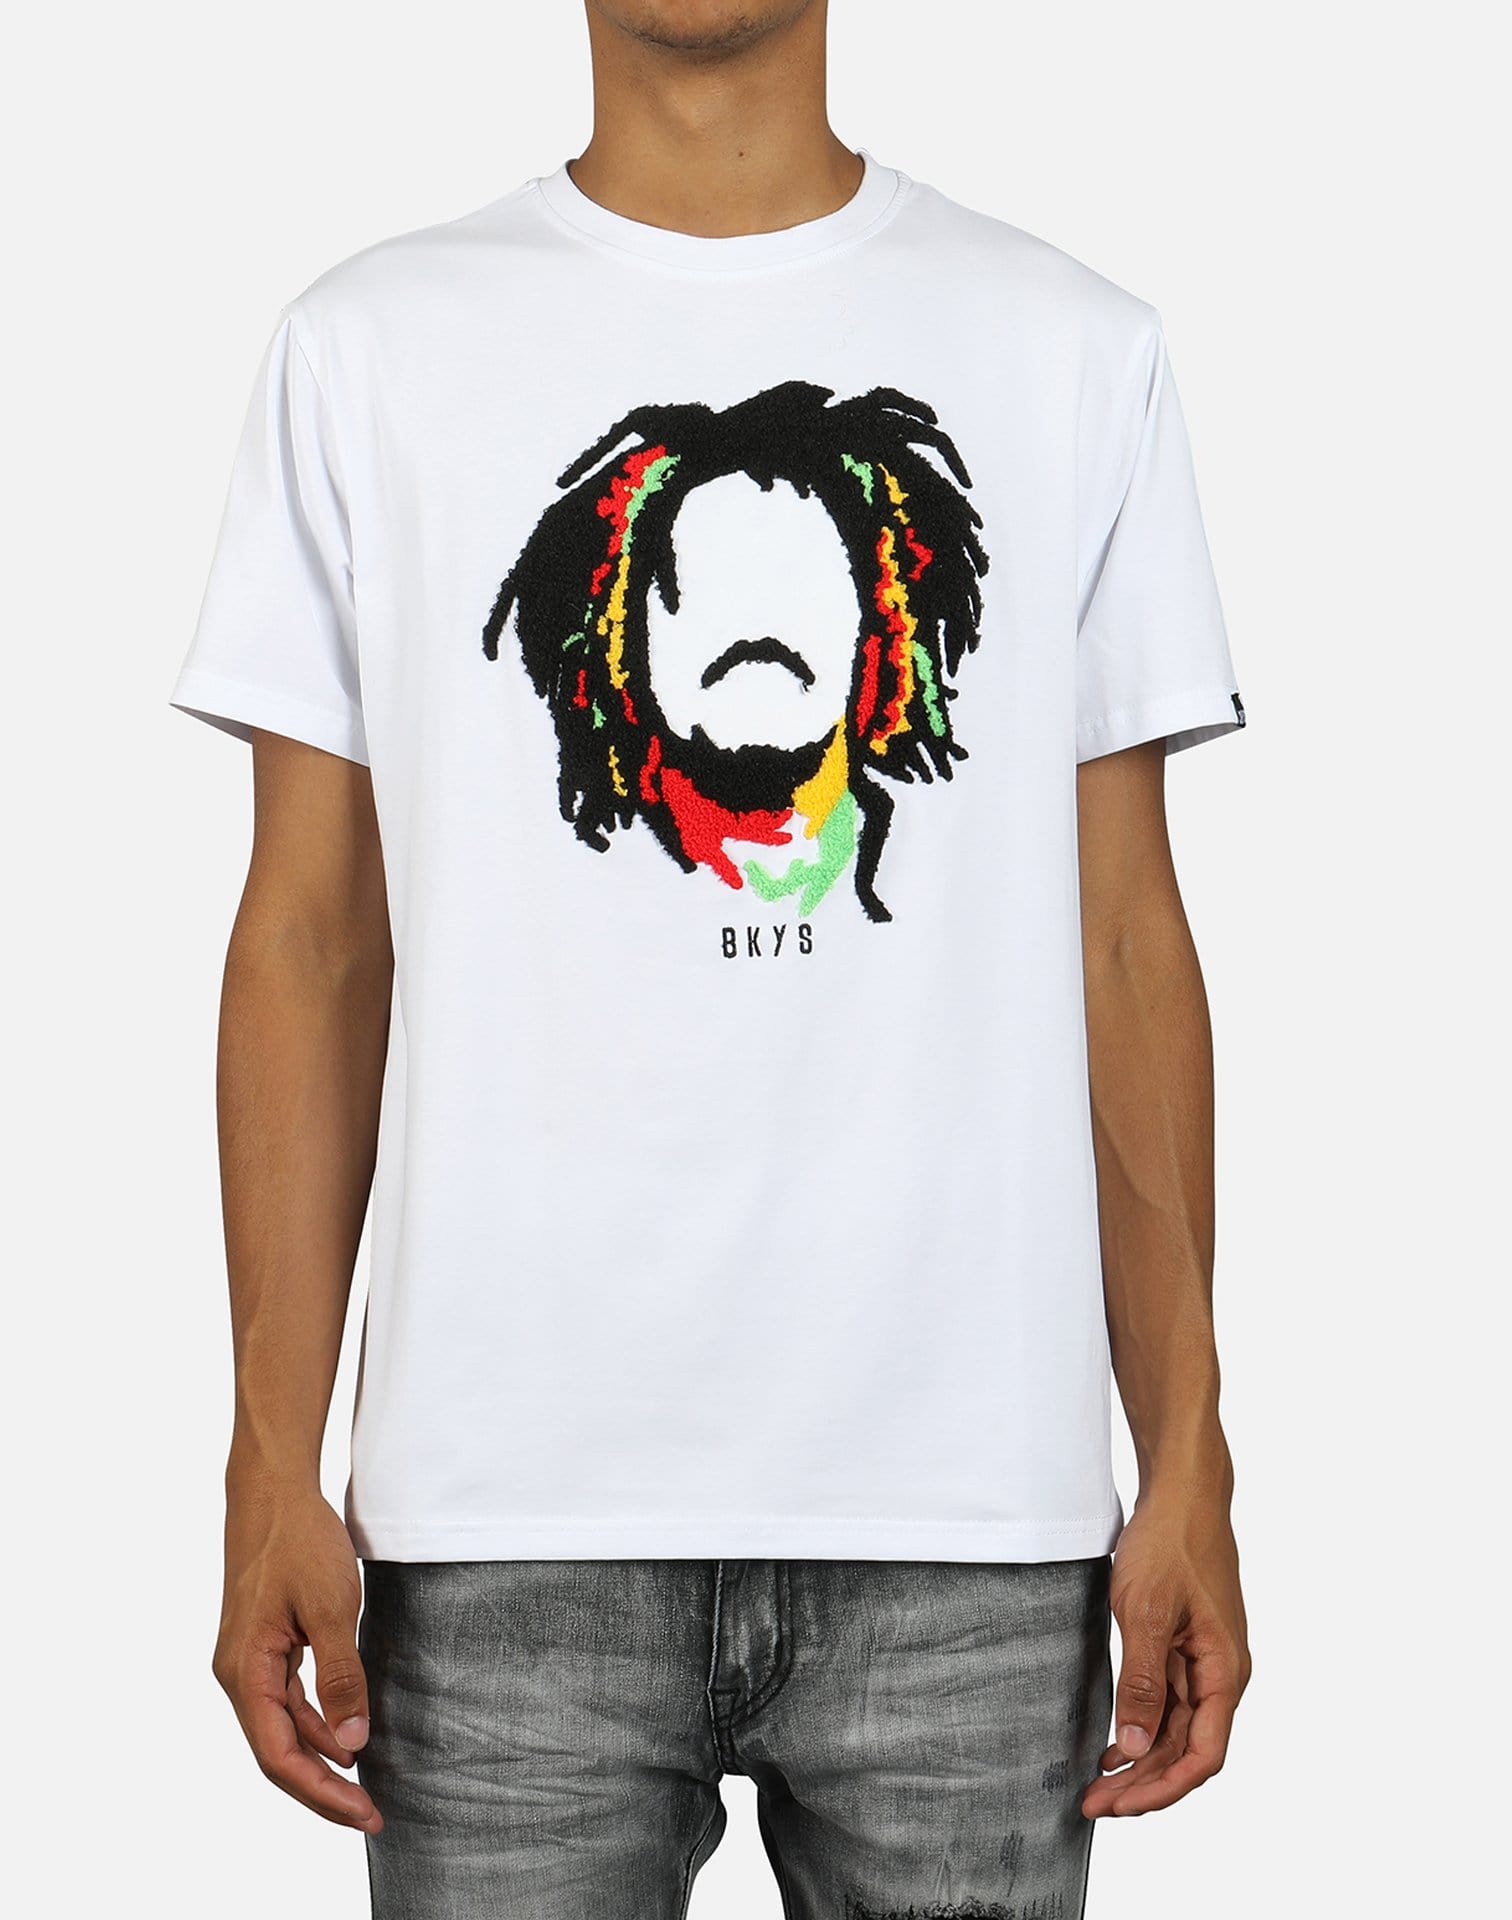 K and S Men's Marley Tee